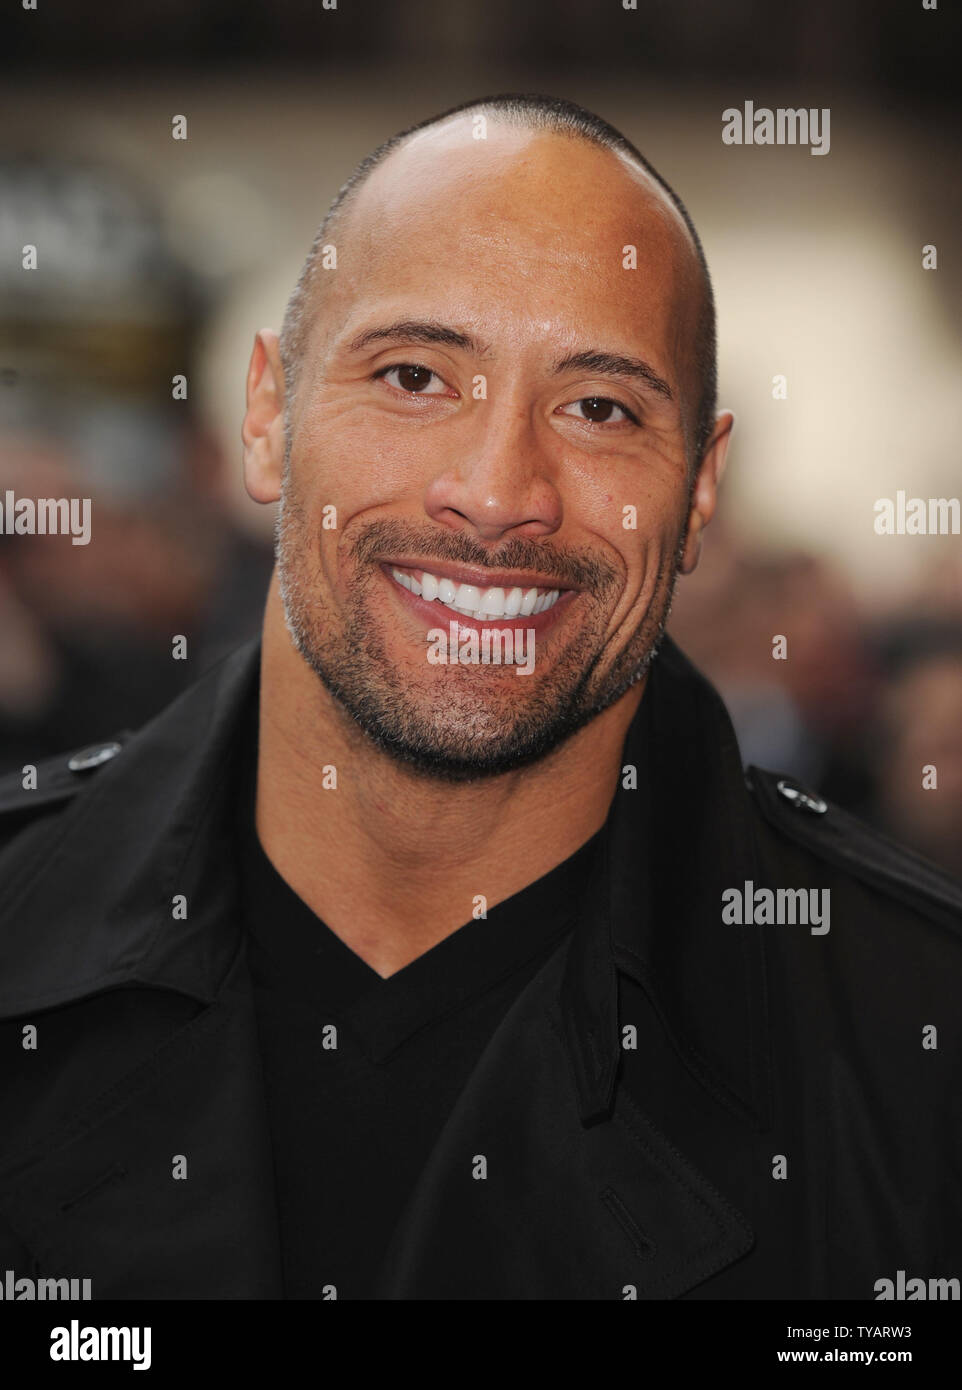 American actor Dwayne Johnson attends the premiere of 'Race To Witch Mountain' at Odeon West End, Leicester Square in London on April 5, 2009.  (UPI Photo/Rune Hellestad) Stock Photo